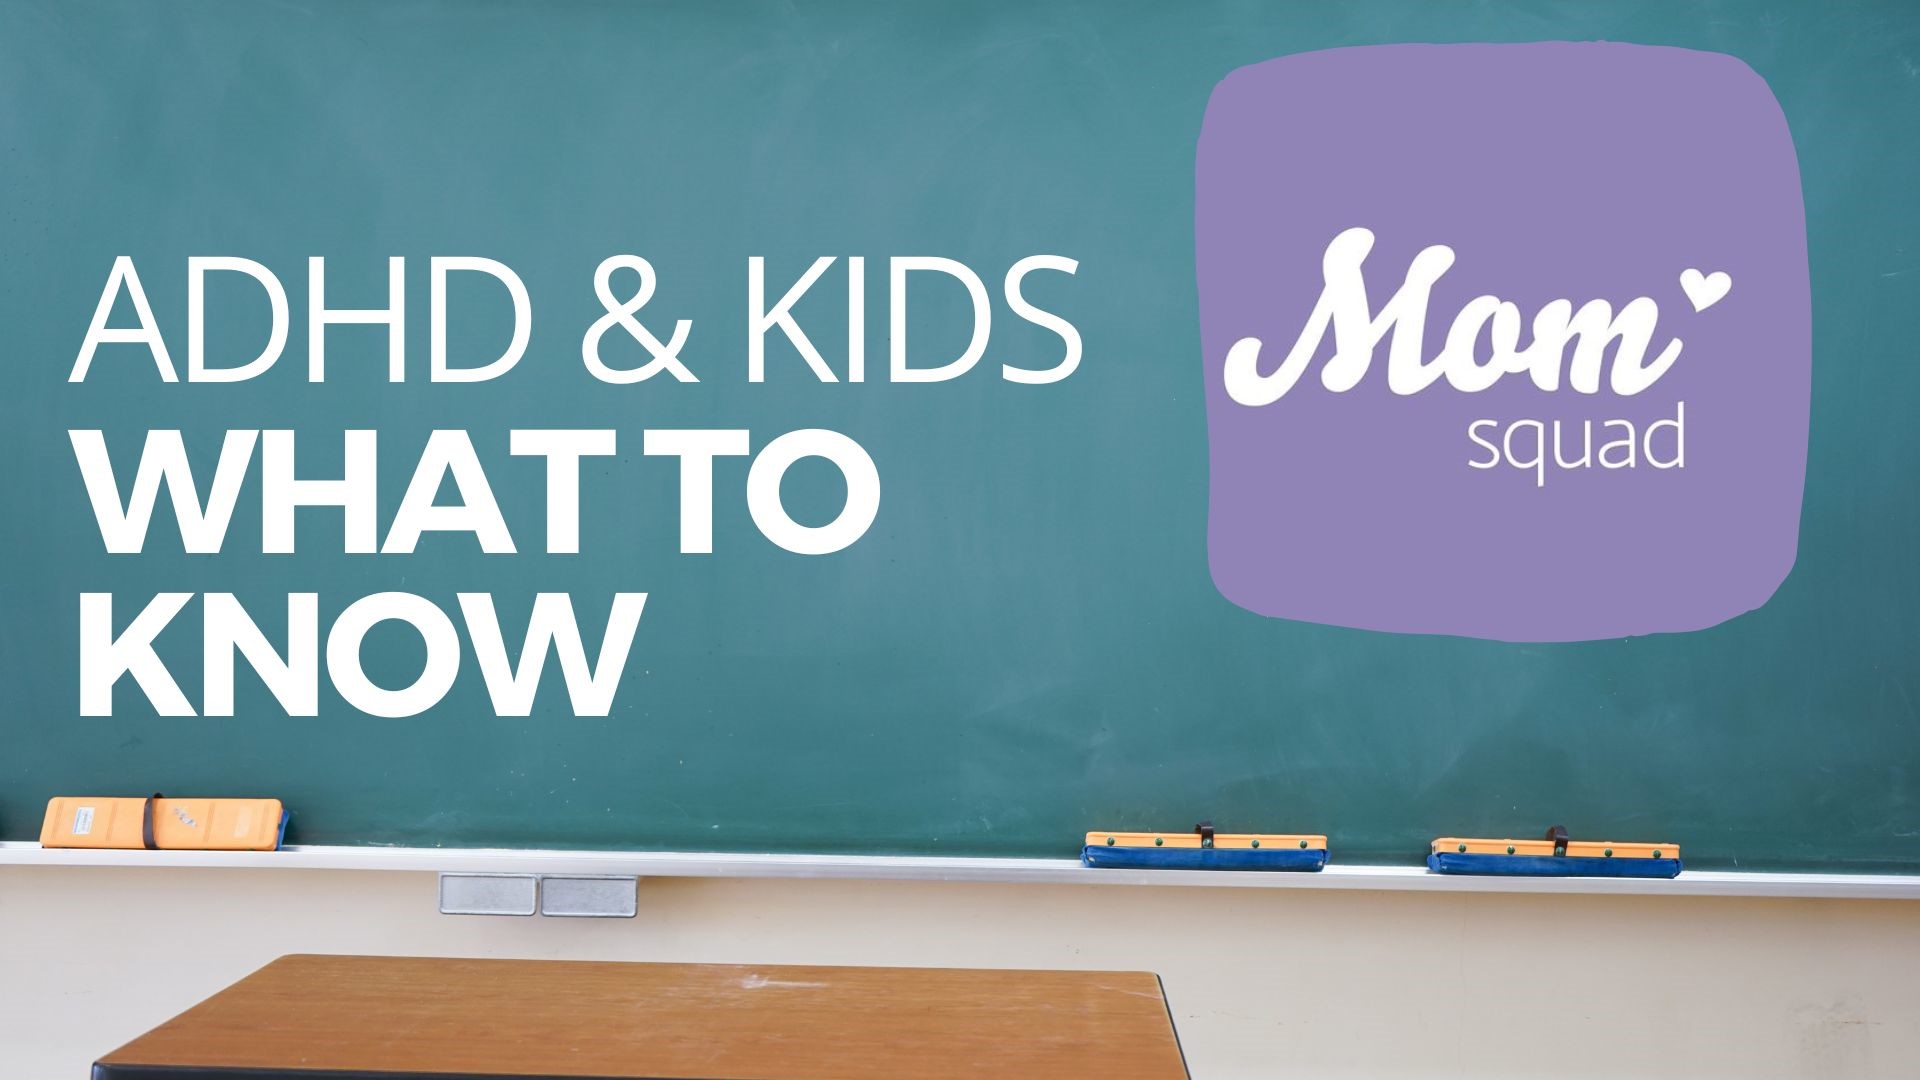 Maureen Kyle explains what parents need to know about ADHD and children. Hear from one mom who deals with ADHD in her household and a doctor.